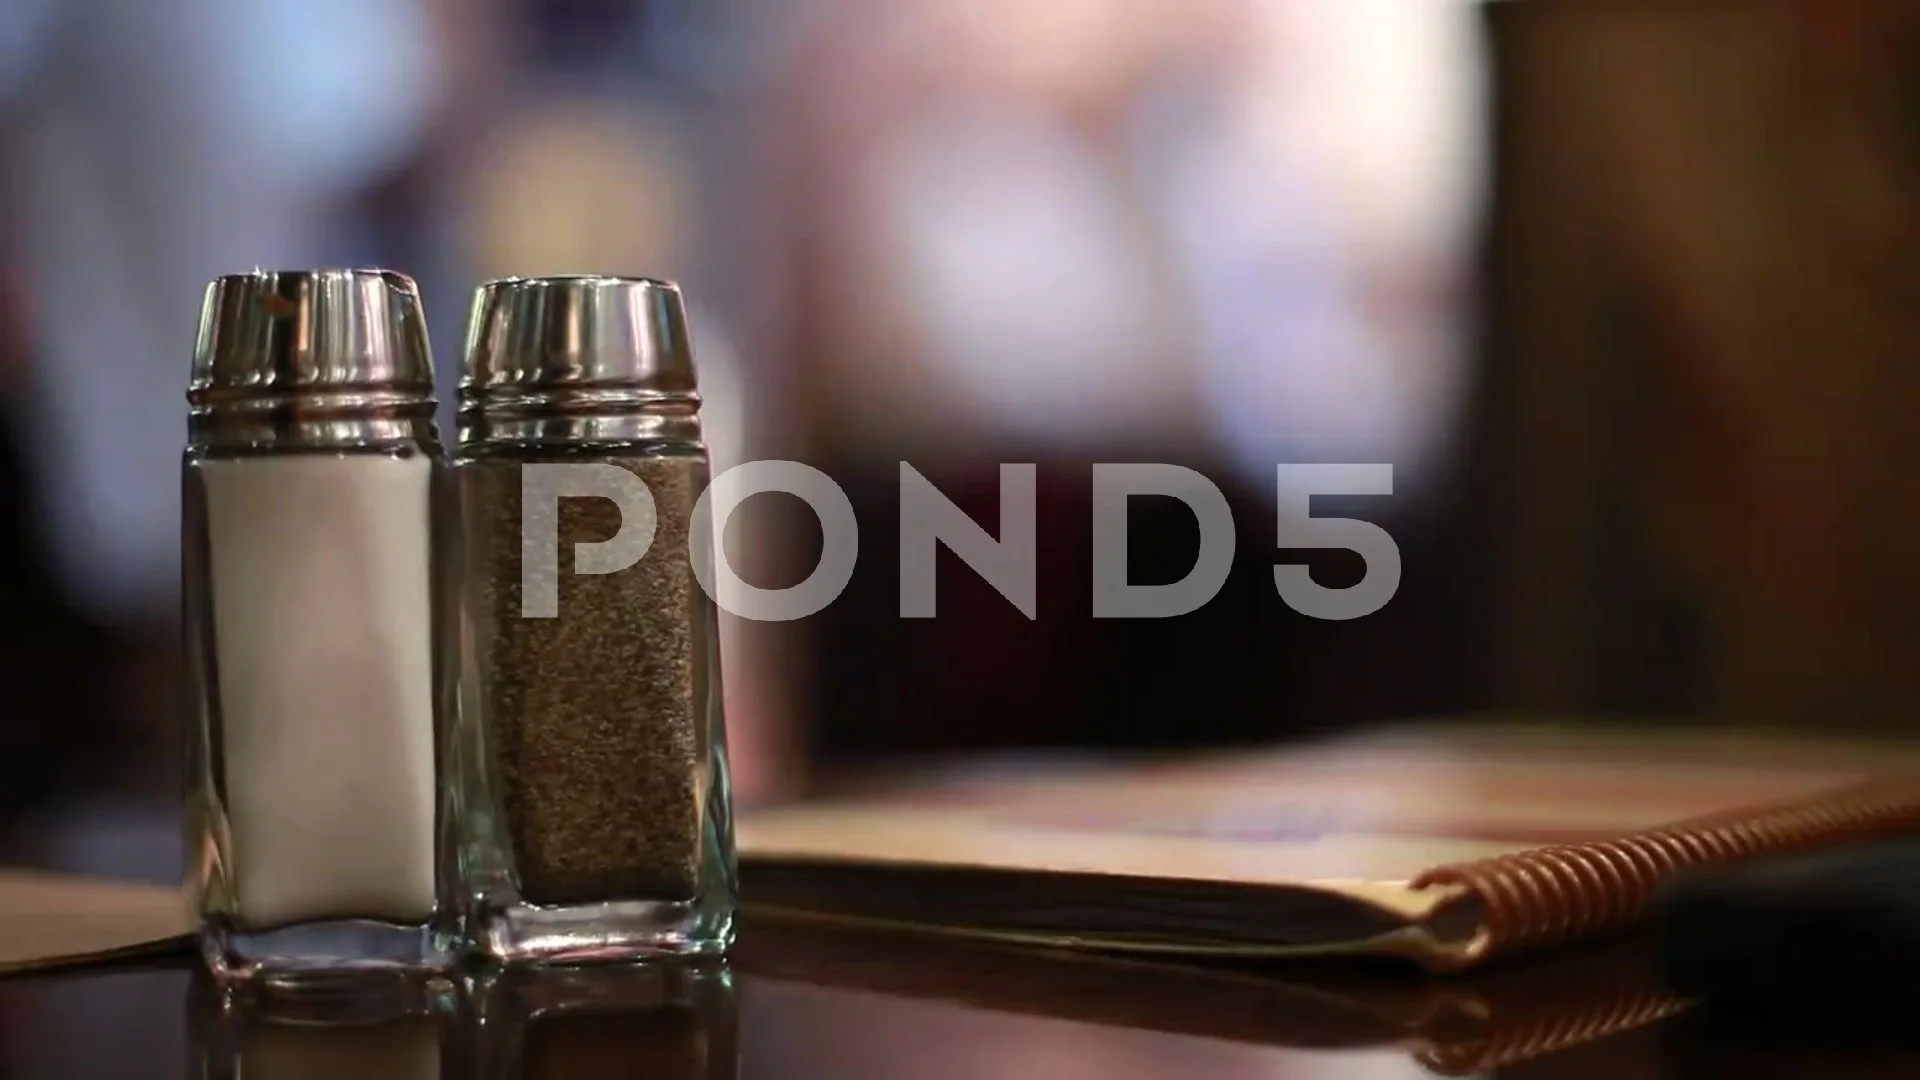 6,600+ Salt Pepper Shaker Stock Videos and Royalty-Free Footage